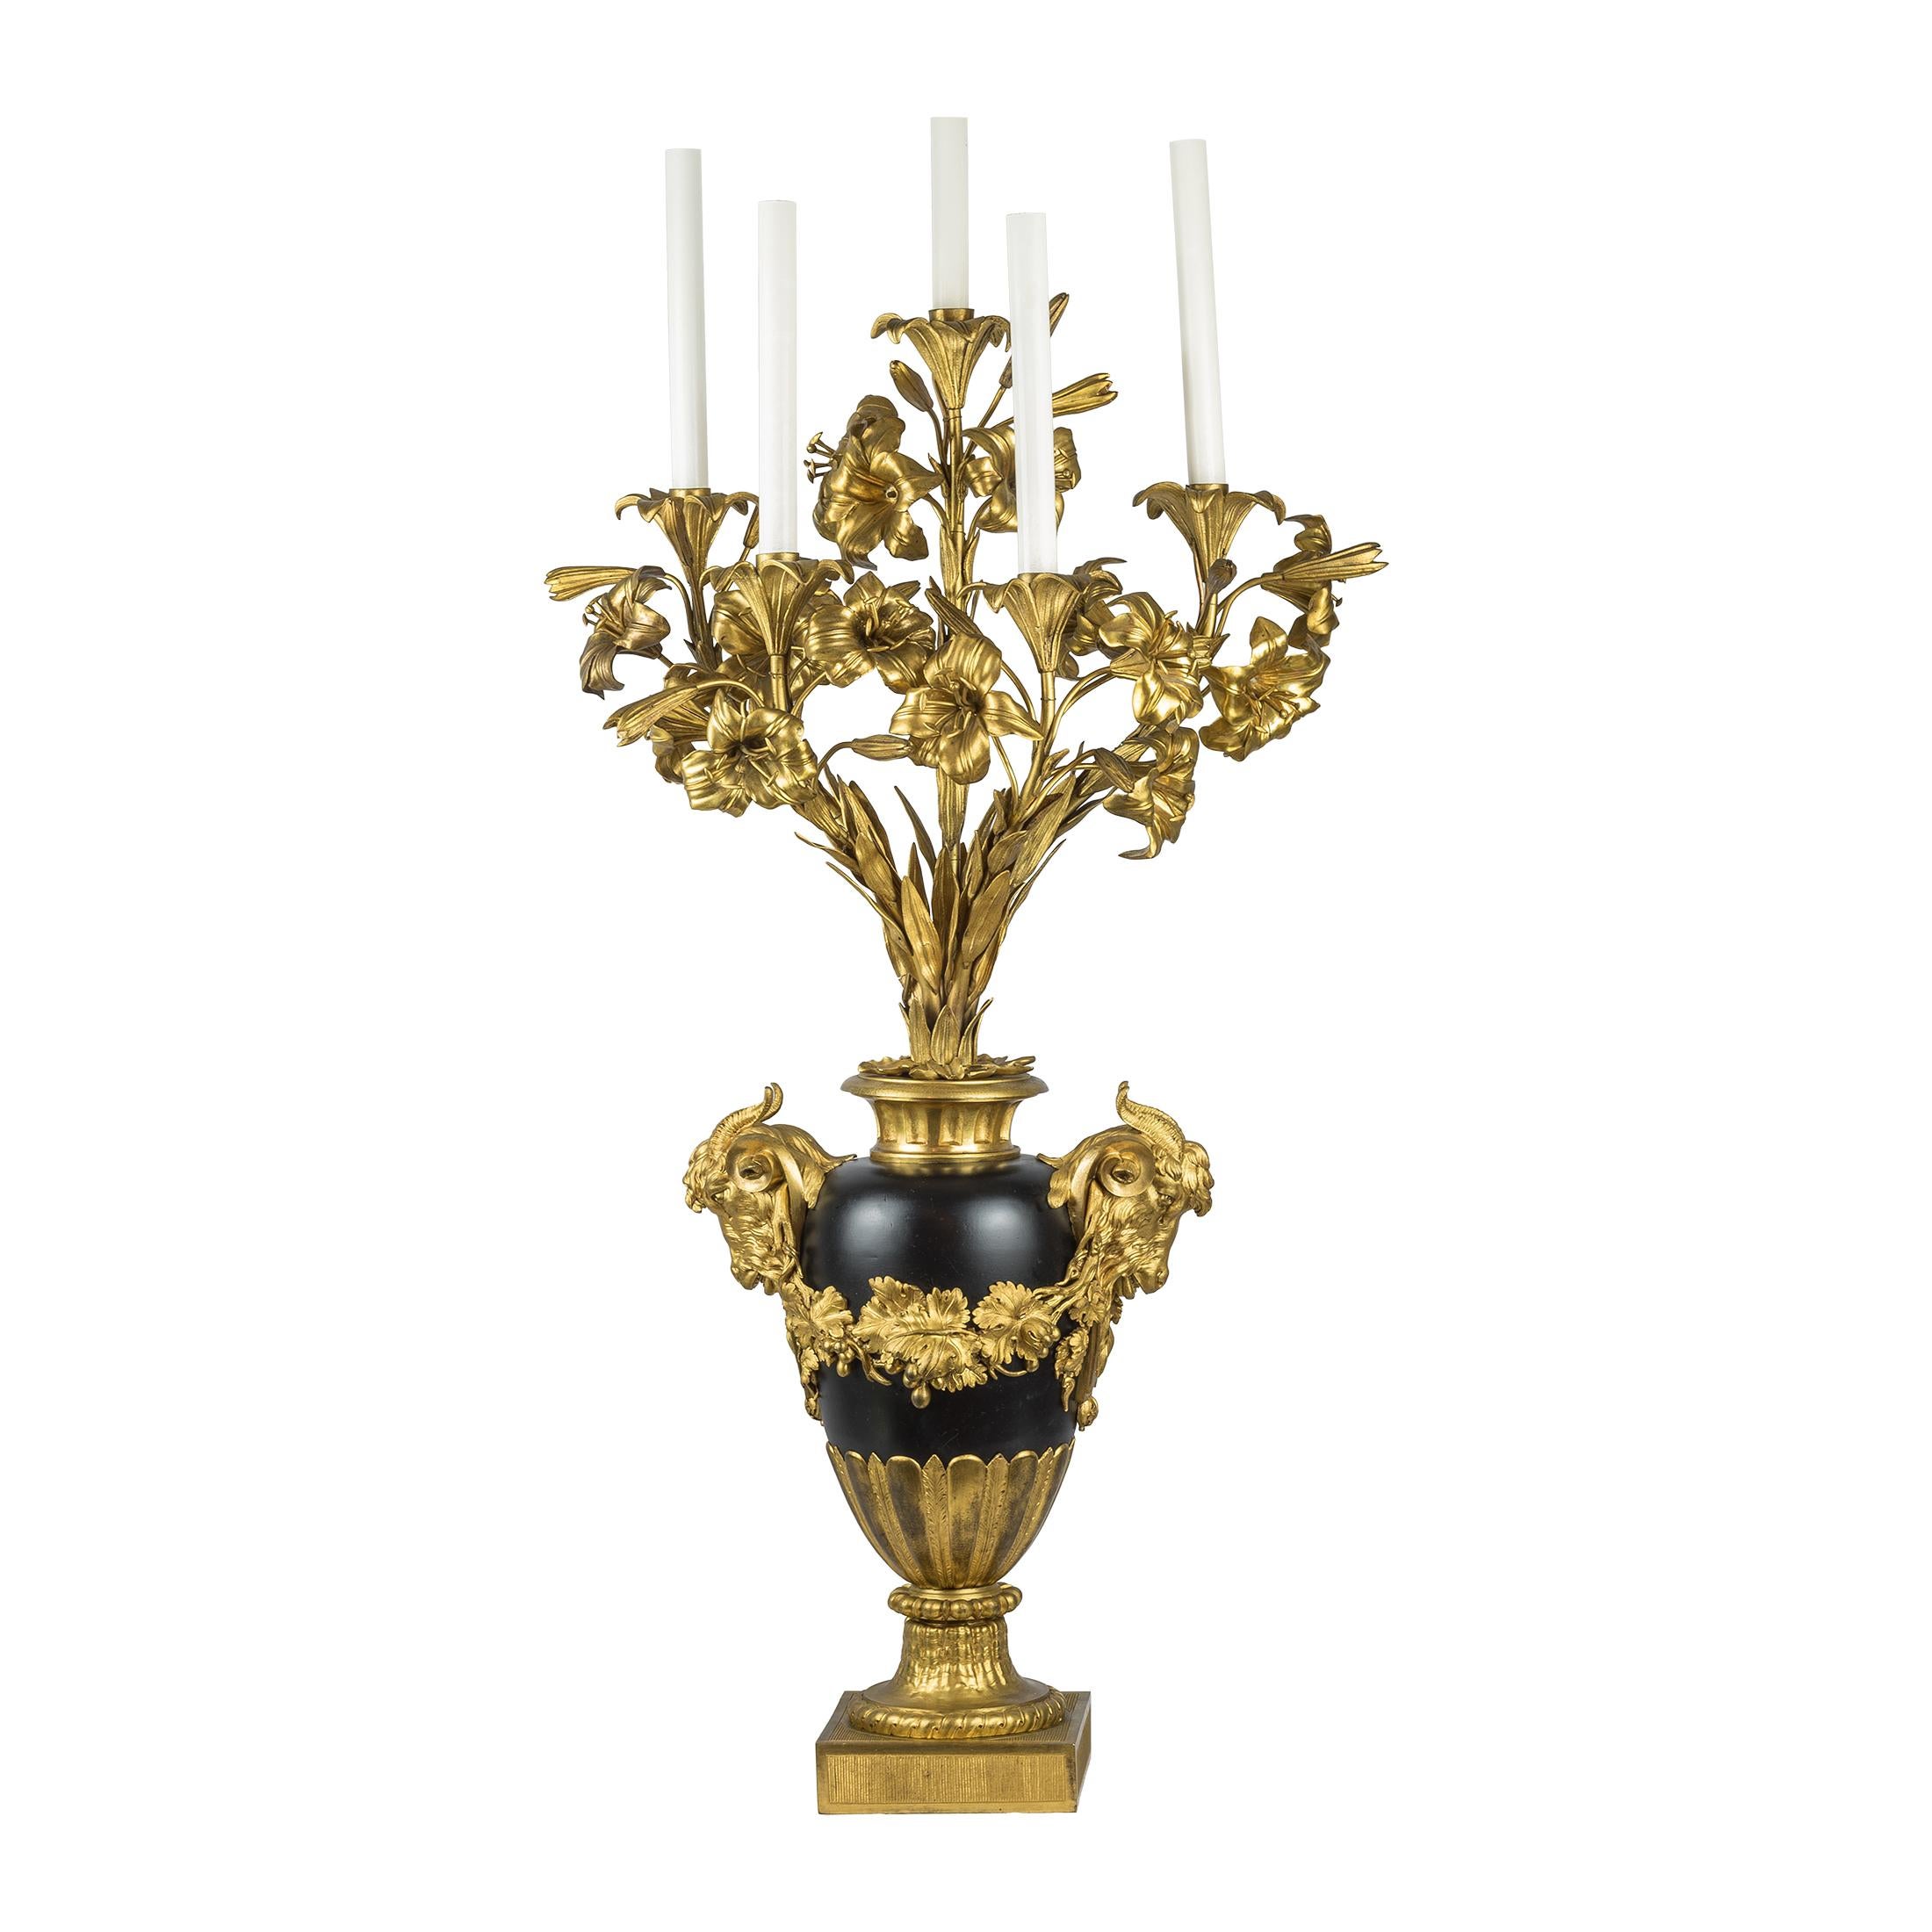 A fine quality pair of gilt bronze five-light candelabras with floral arms and ram's head handles on a porcelain urn with grape vine all around and rams head handles culminating in a footed bronze base.

Origin: French
Date: 19th